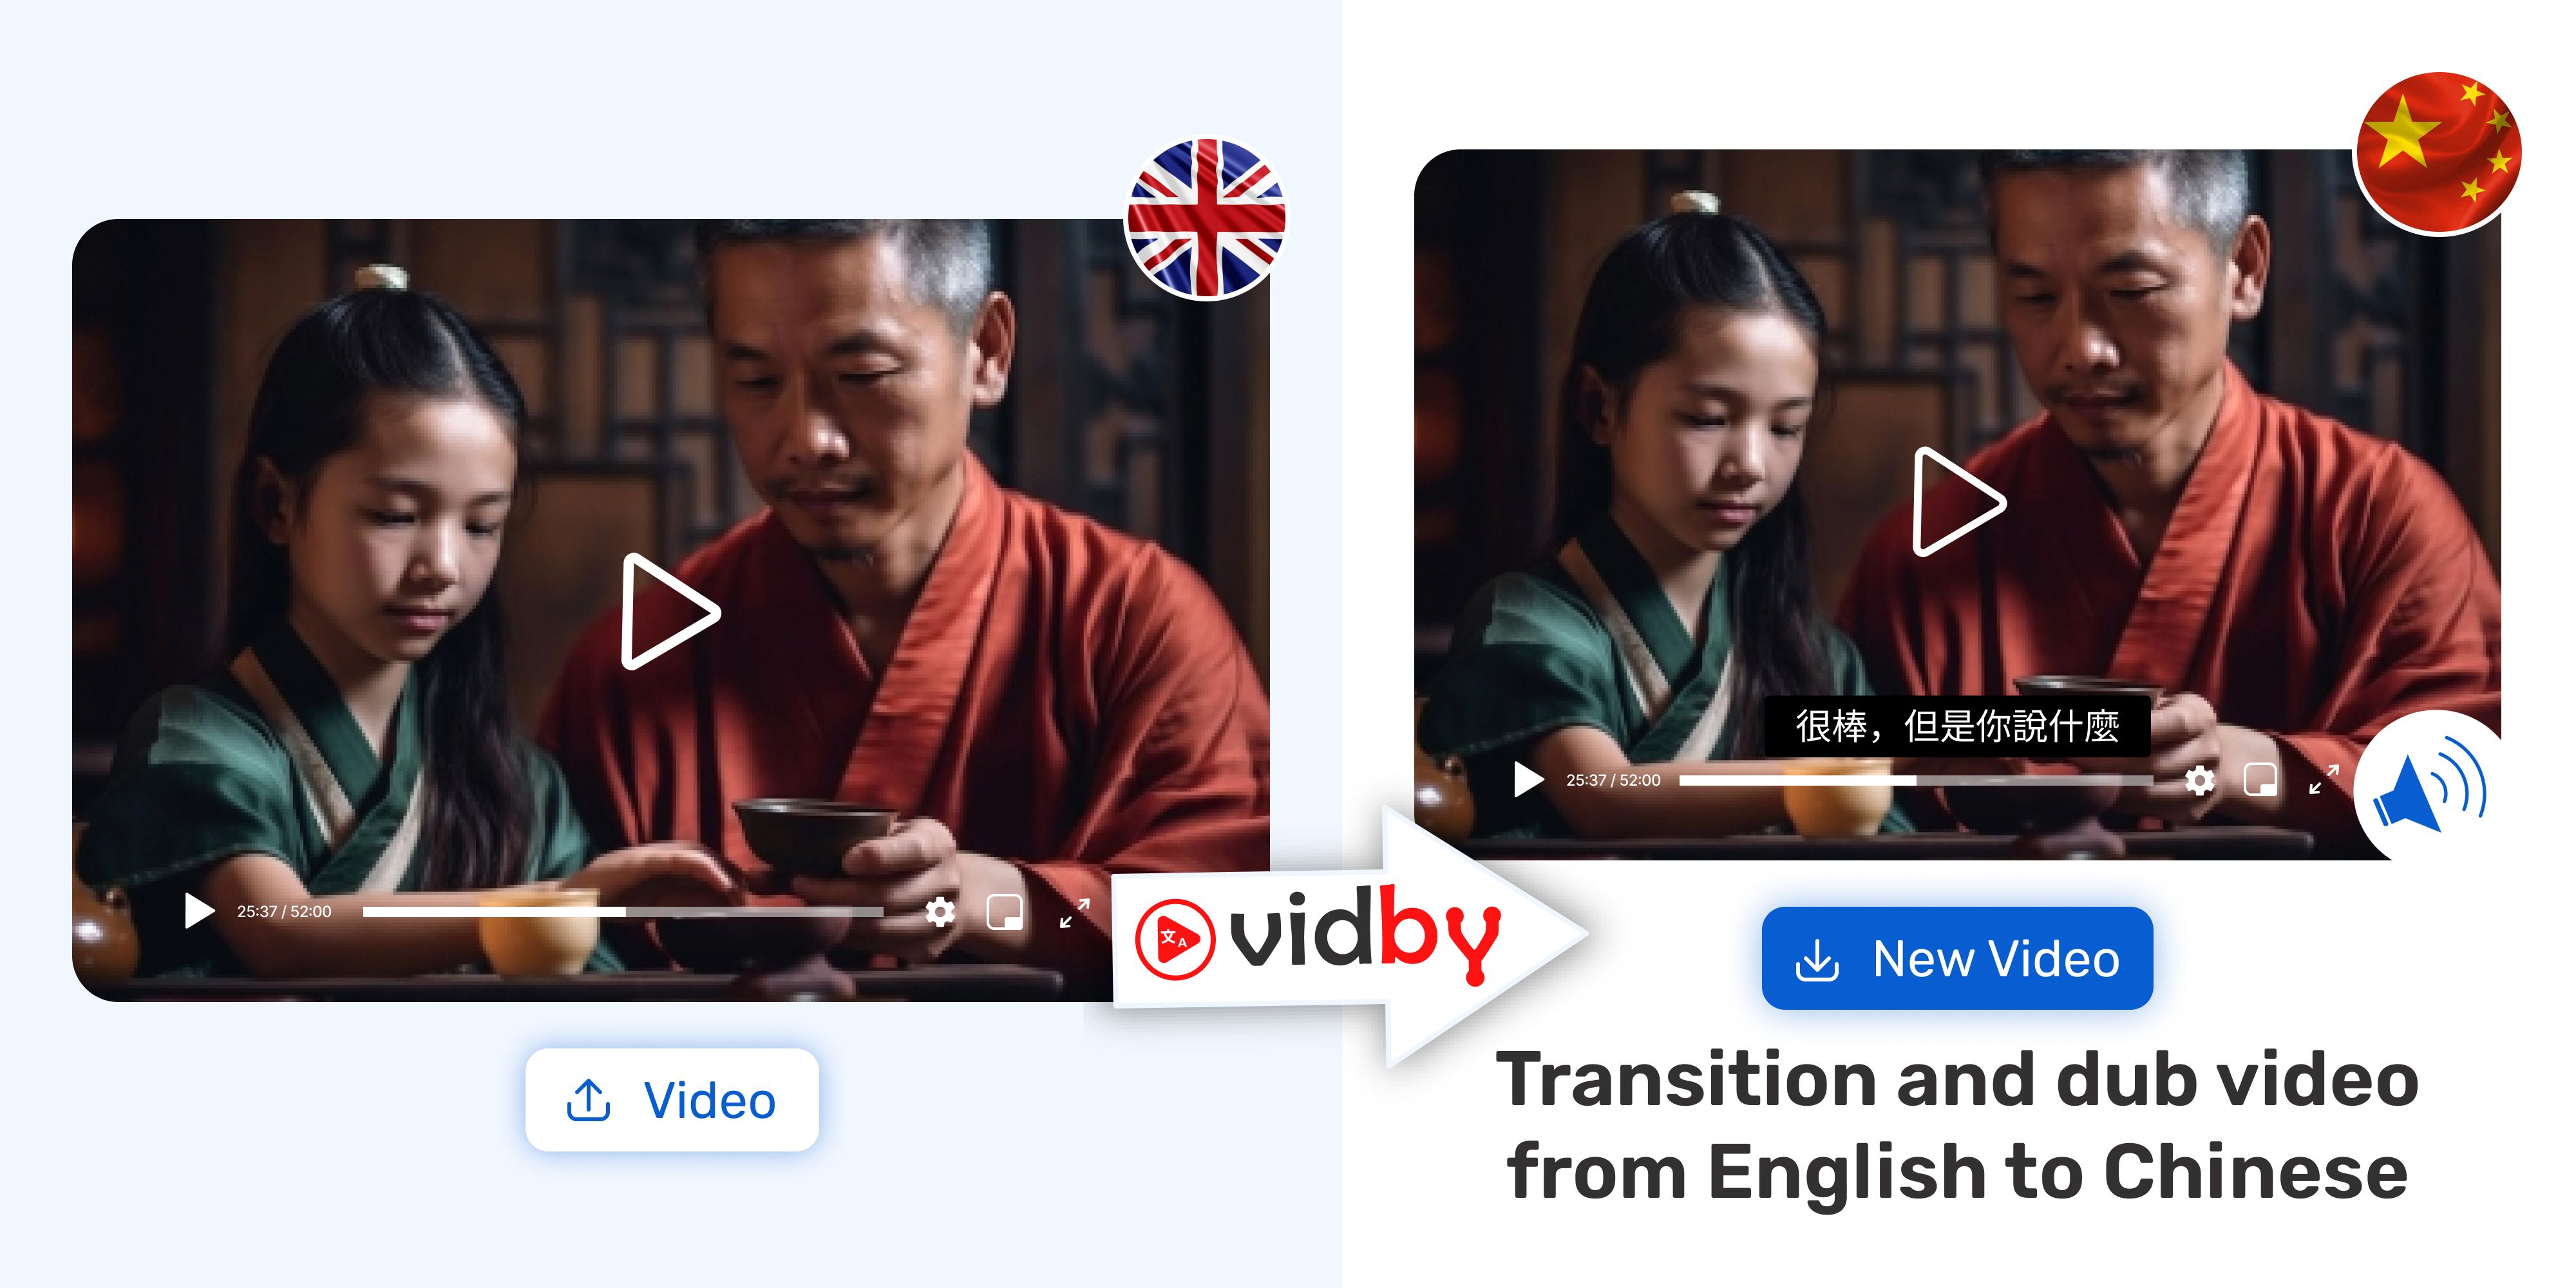 Translate English video to Chinese